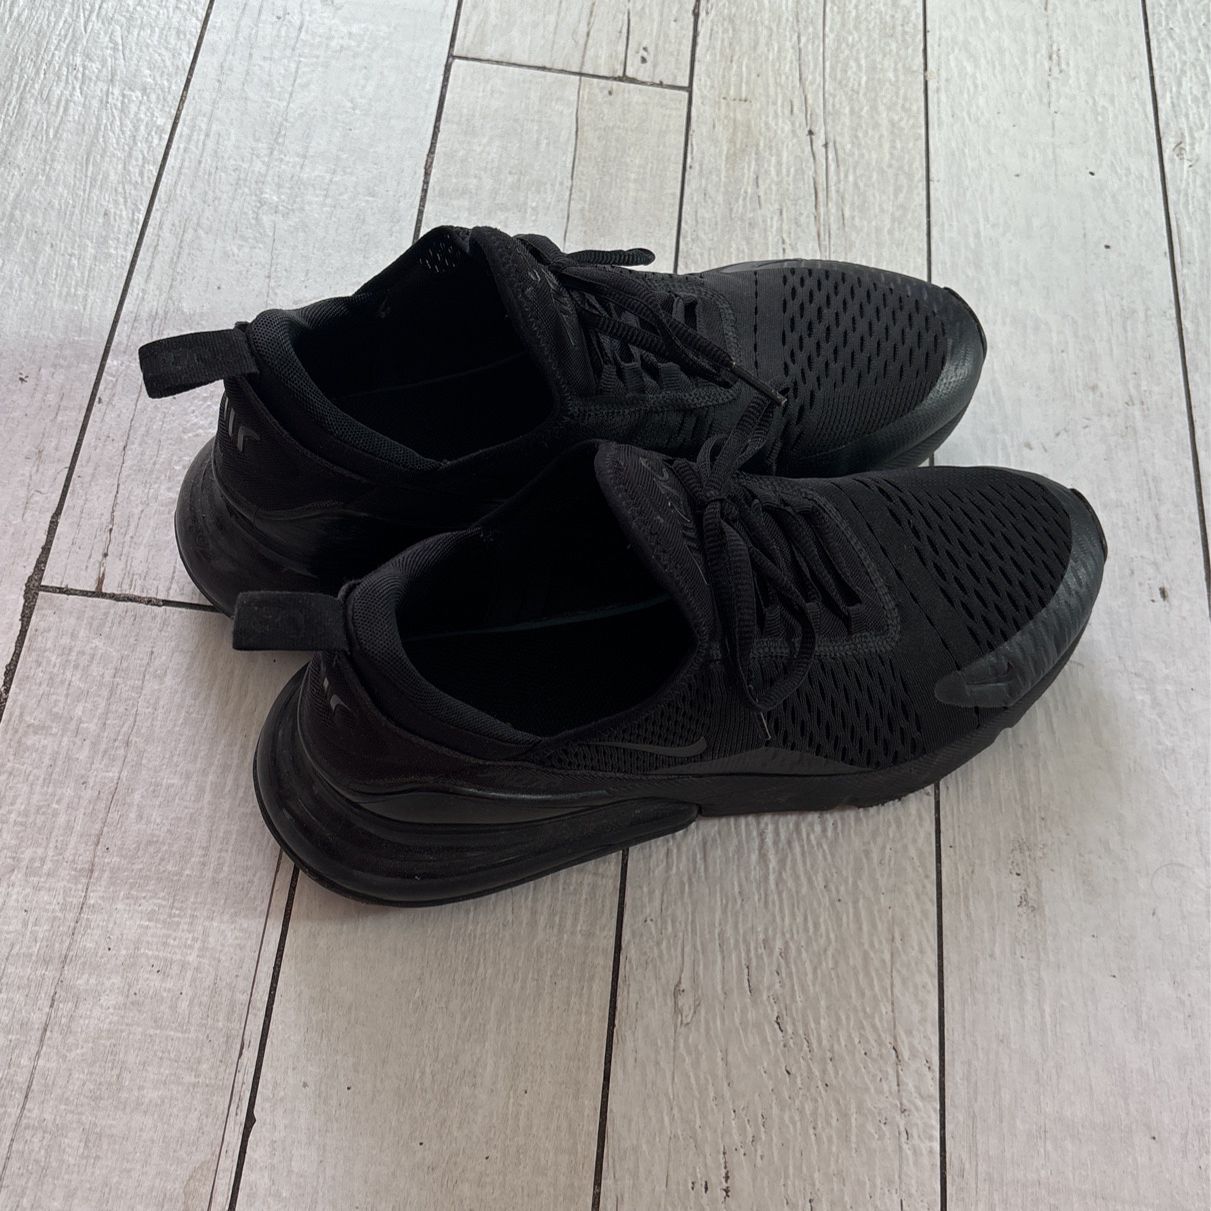 Nike Air Max 270s All Black Size 11